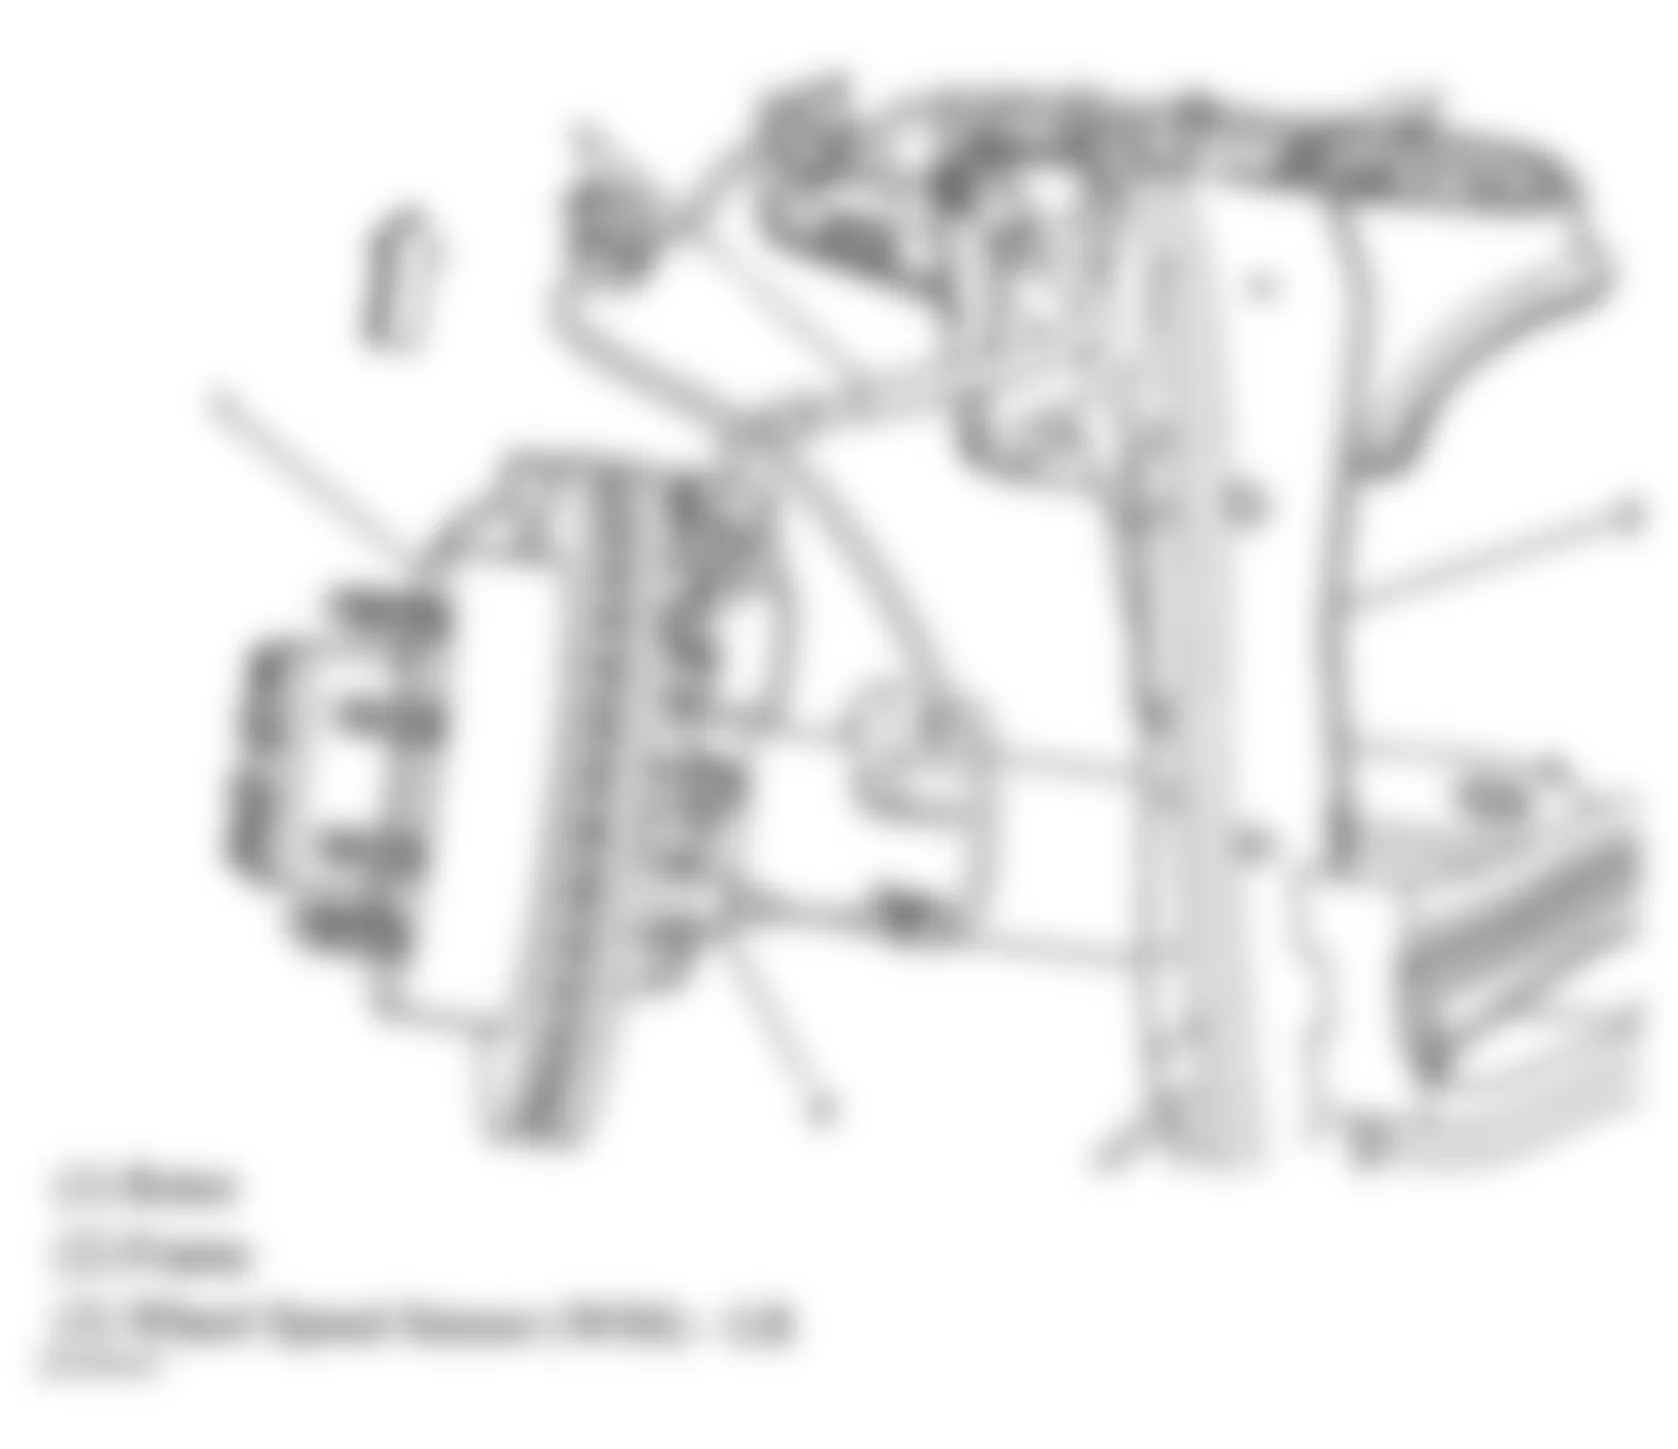 GMC Savana H1500 2005 - Component Locations -  Left Side Of Rear Axle